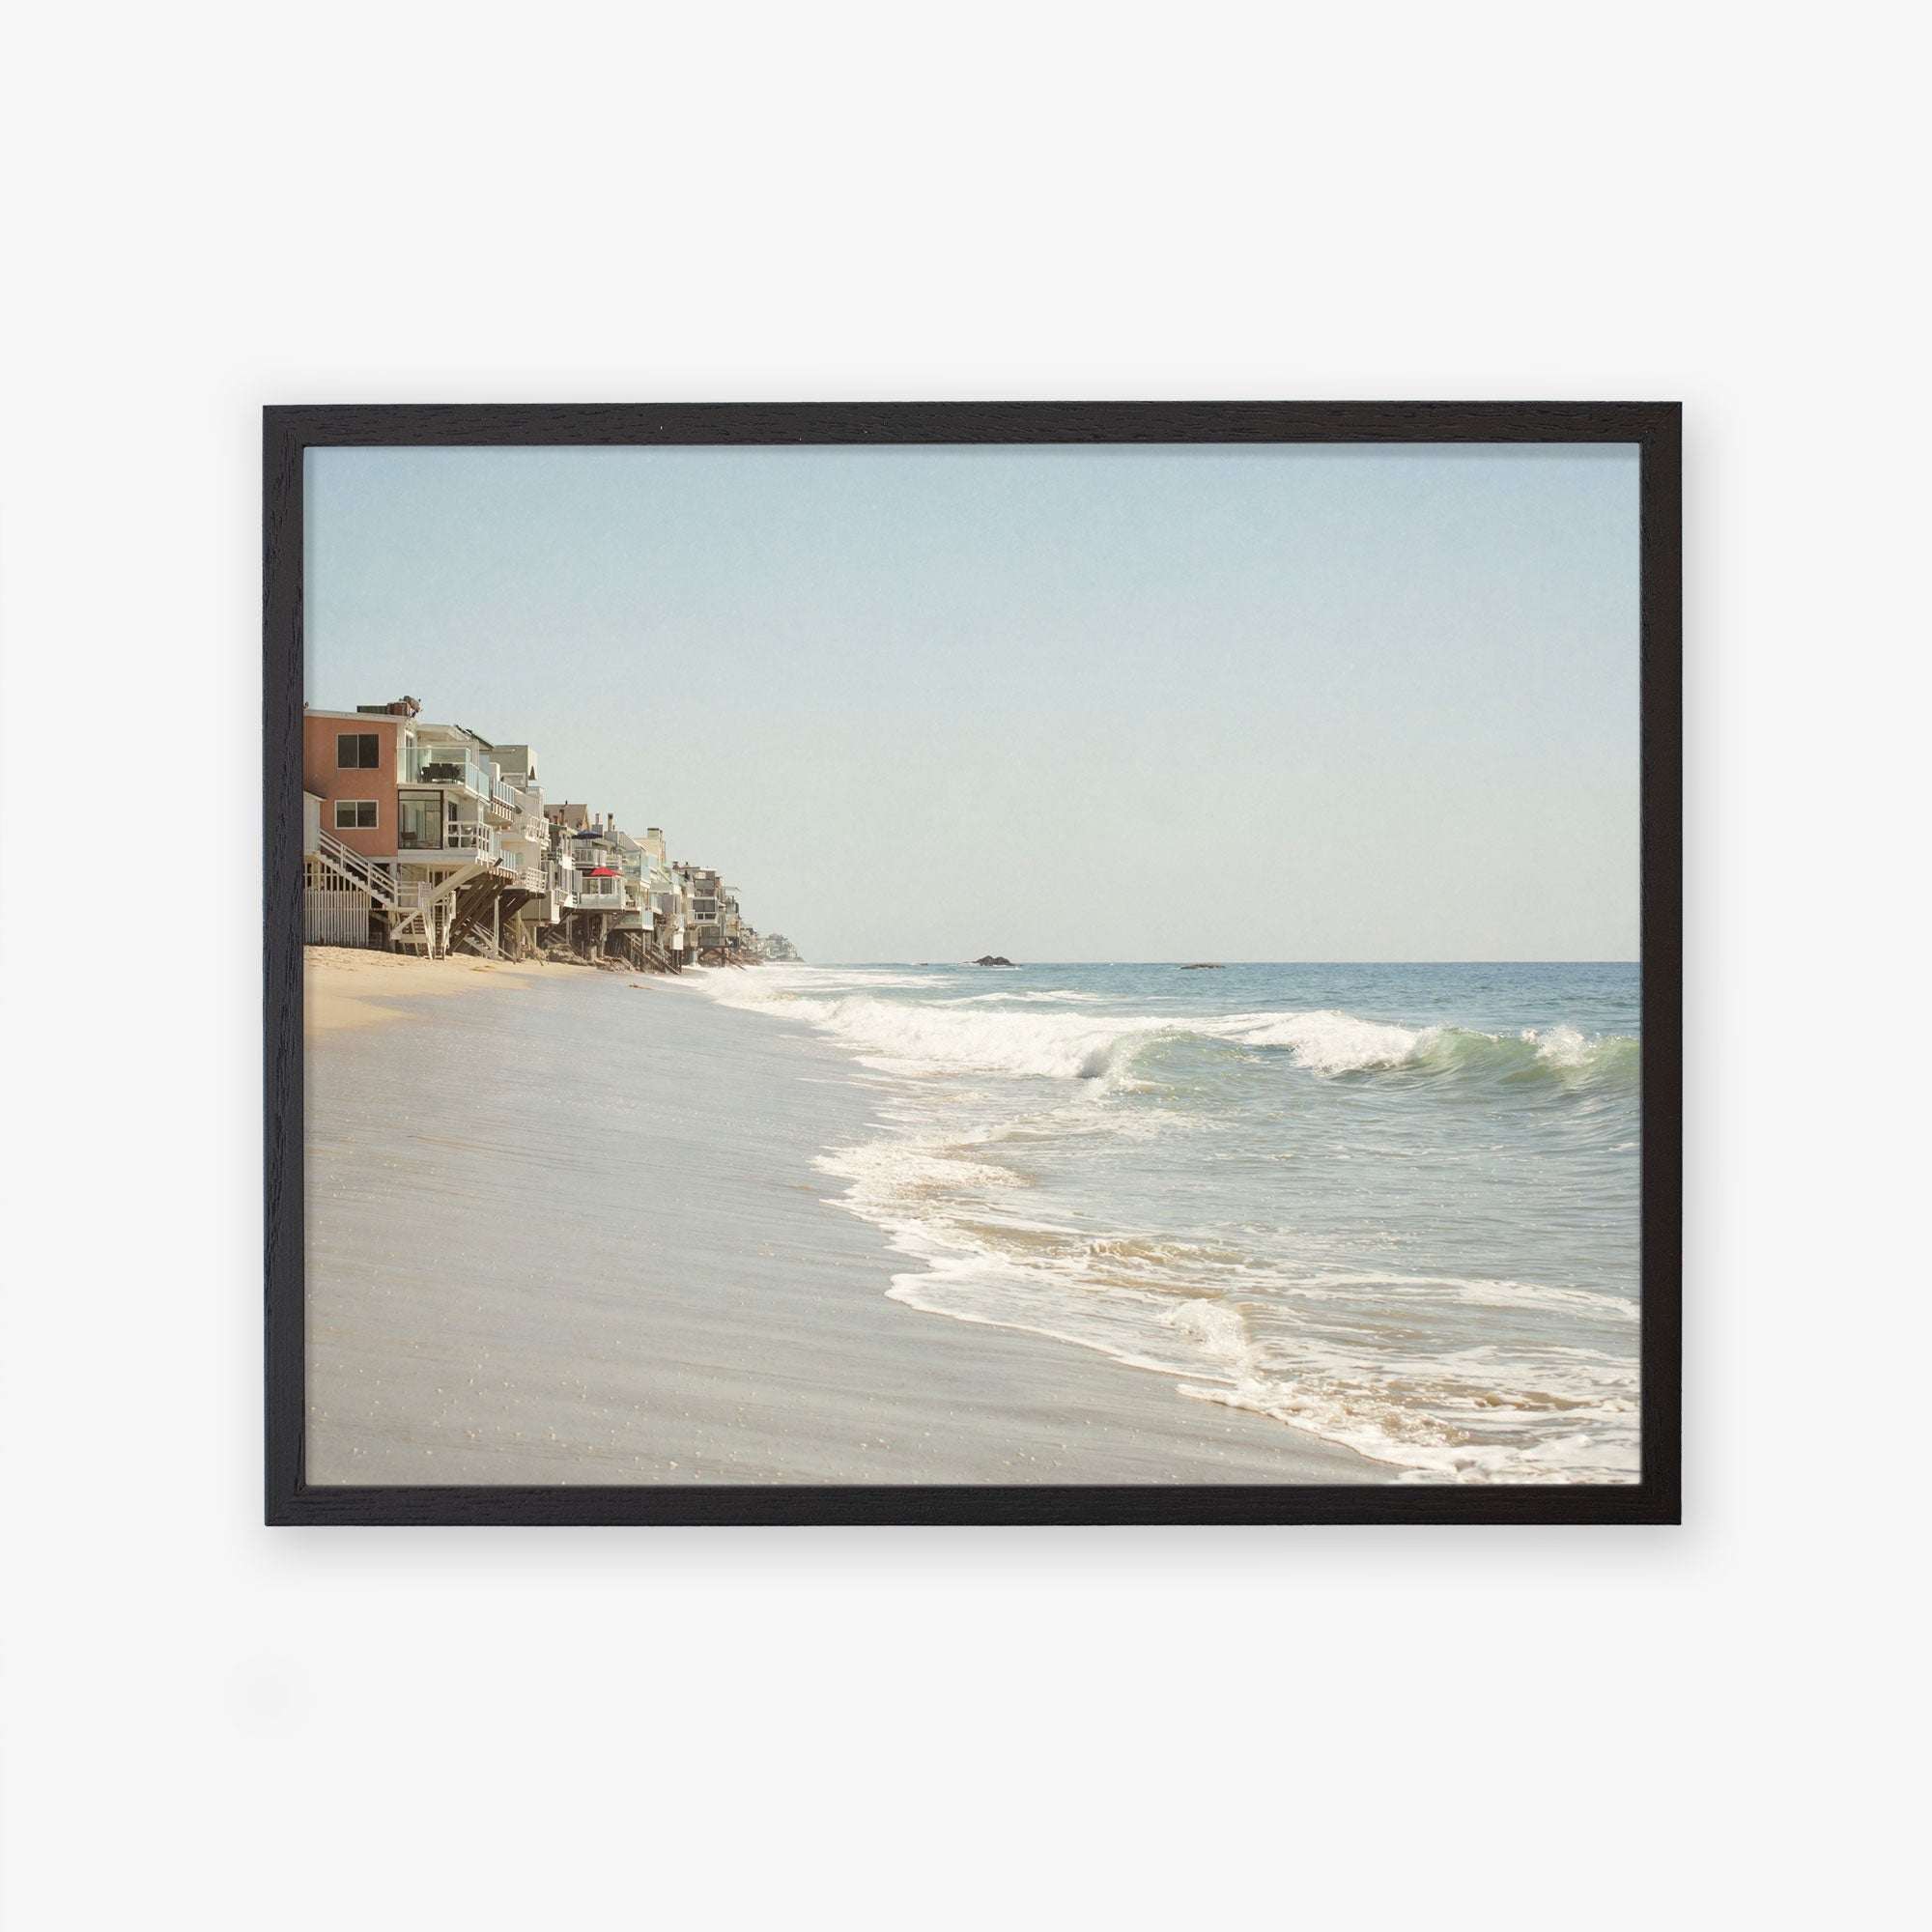 A framed wall art of a Malibu Beach House Print, &#39;Ocean View&#39; by Offley Green, showing beach houses perched along the edge of a sandy beach with gentle waves lapping the shore under a clear sky.